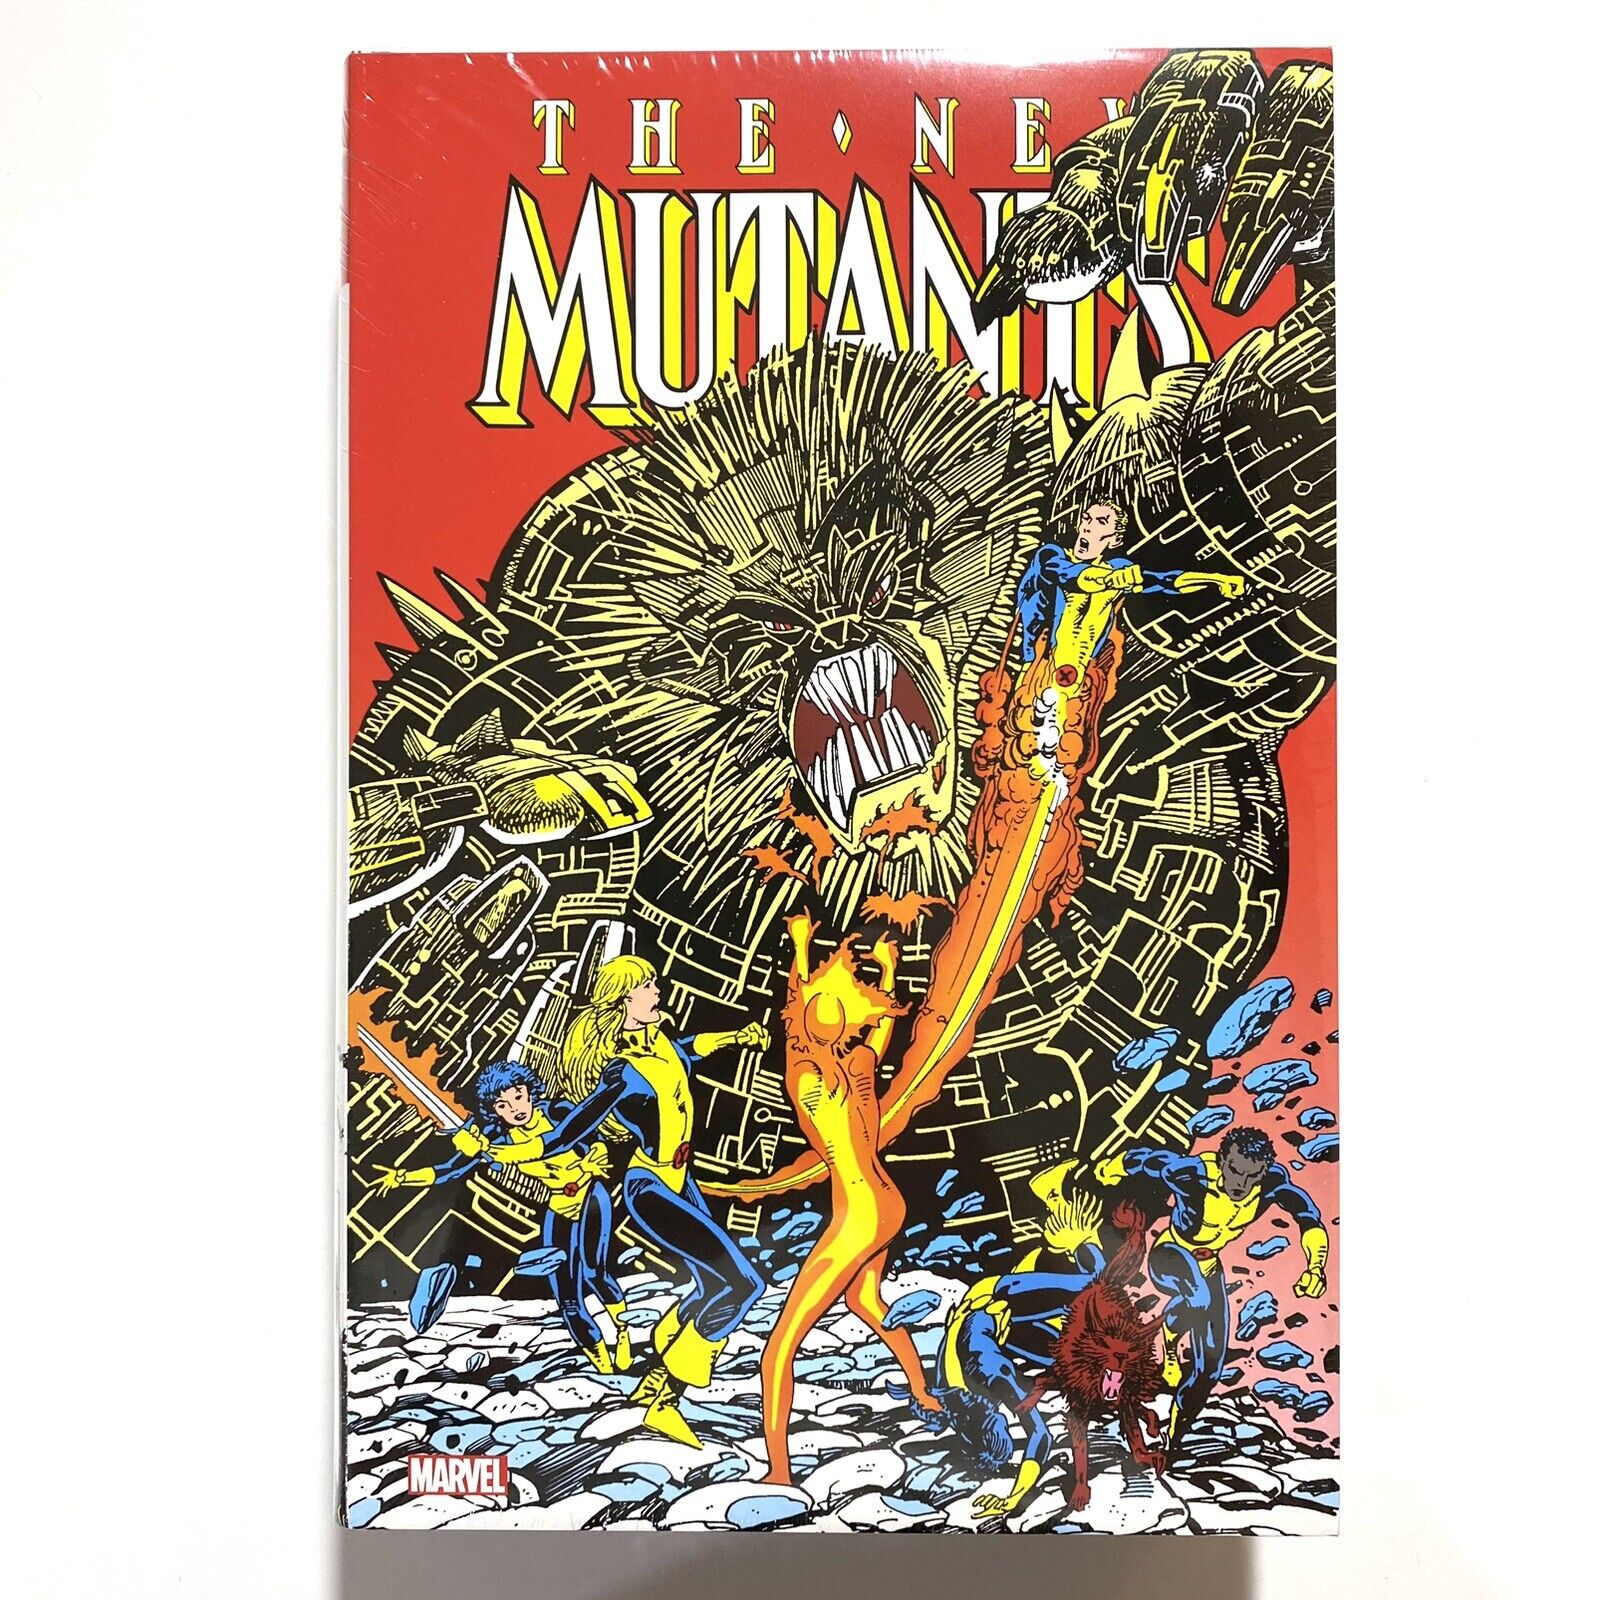 New Mutants Omnibus Vol 2 New Sealed DM Variant $5 Flat Combined Shipping